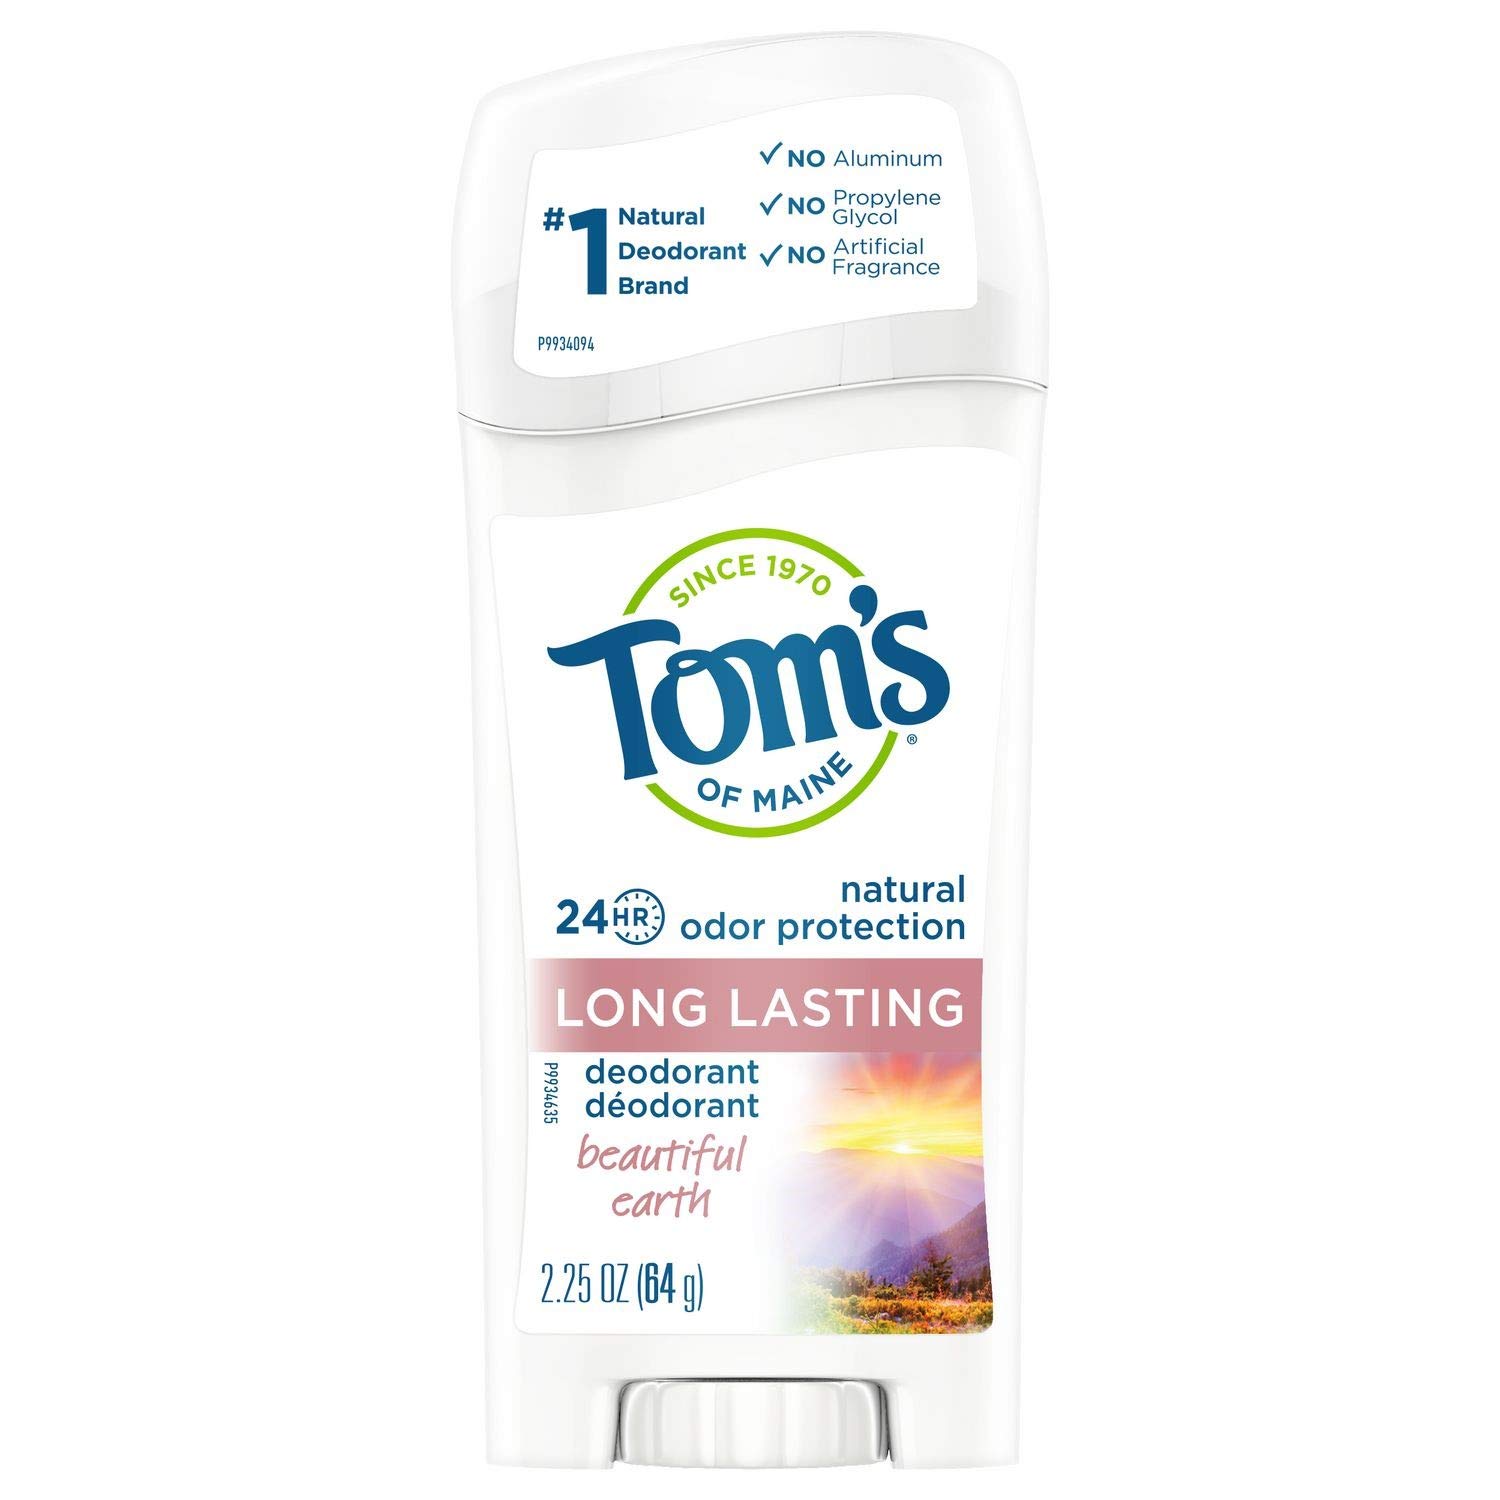 Tom's Of Maine Natural Women's Deodorant - Beautiful Earth - 2.25 Oz, Pack of 6